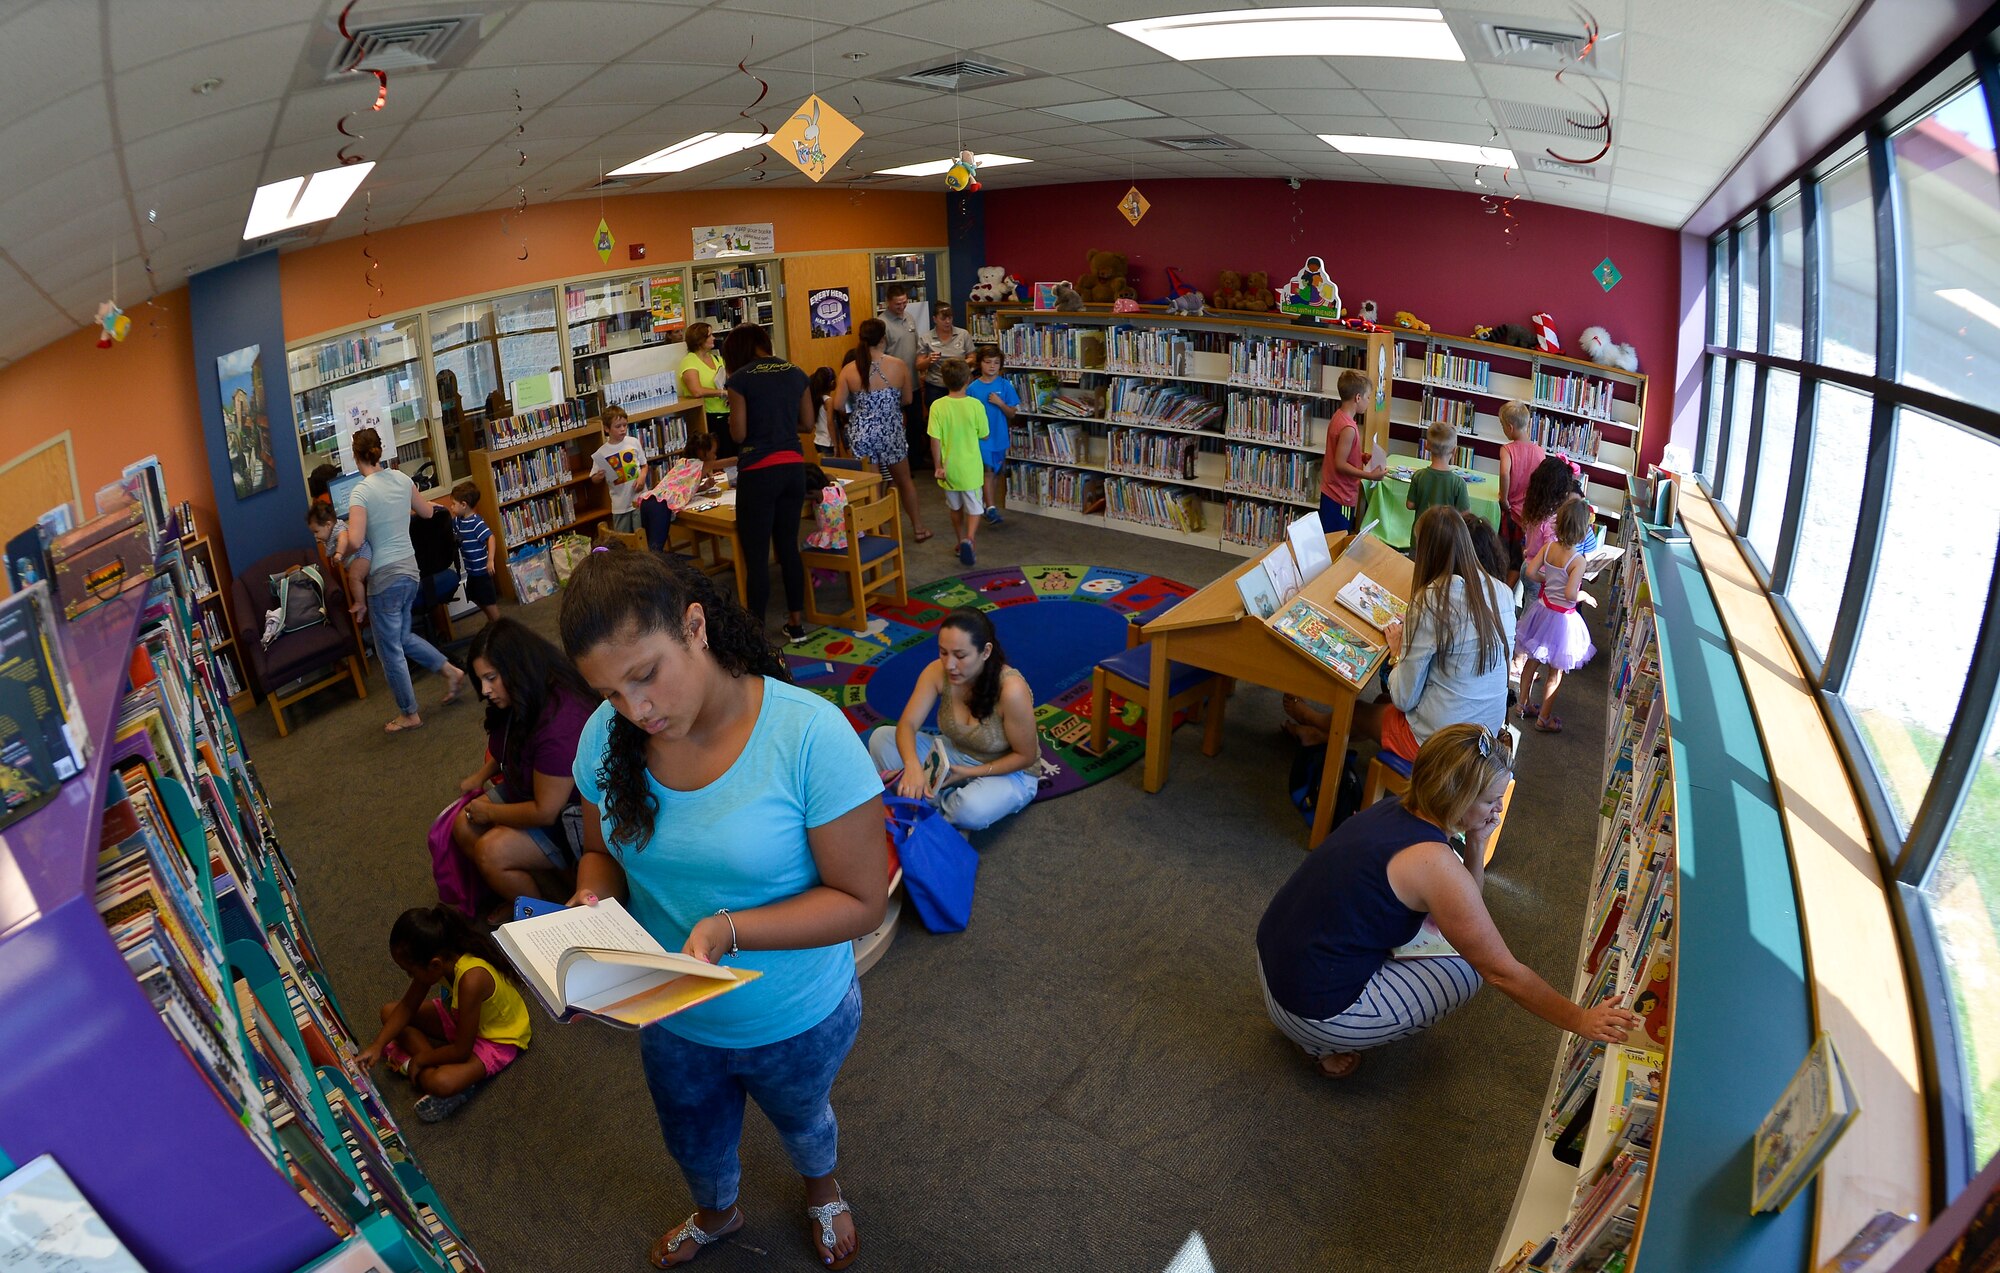 Members of Team MacDill and their families attend the Children’s Summer Reading Program kick-off in the base library at MacDill Air Force Base, Fla., June 9, 2015. The concept of the program is for children to log the books they read in order to be entered into various drawings for grand prizes, such as stuffed animals and books. (U.S. Air Force photo by Staff Sgt. Shandresha Mitchell/Released)